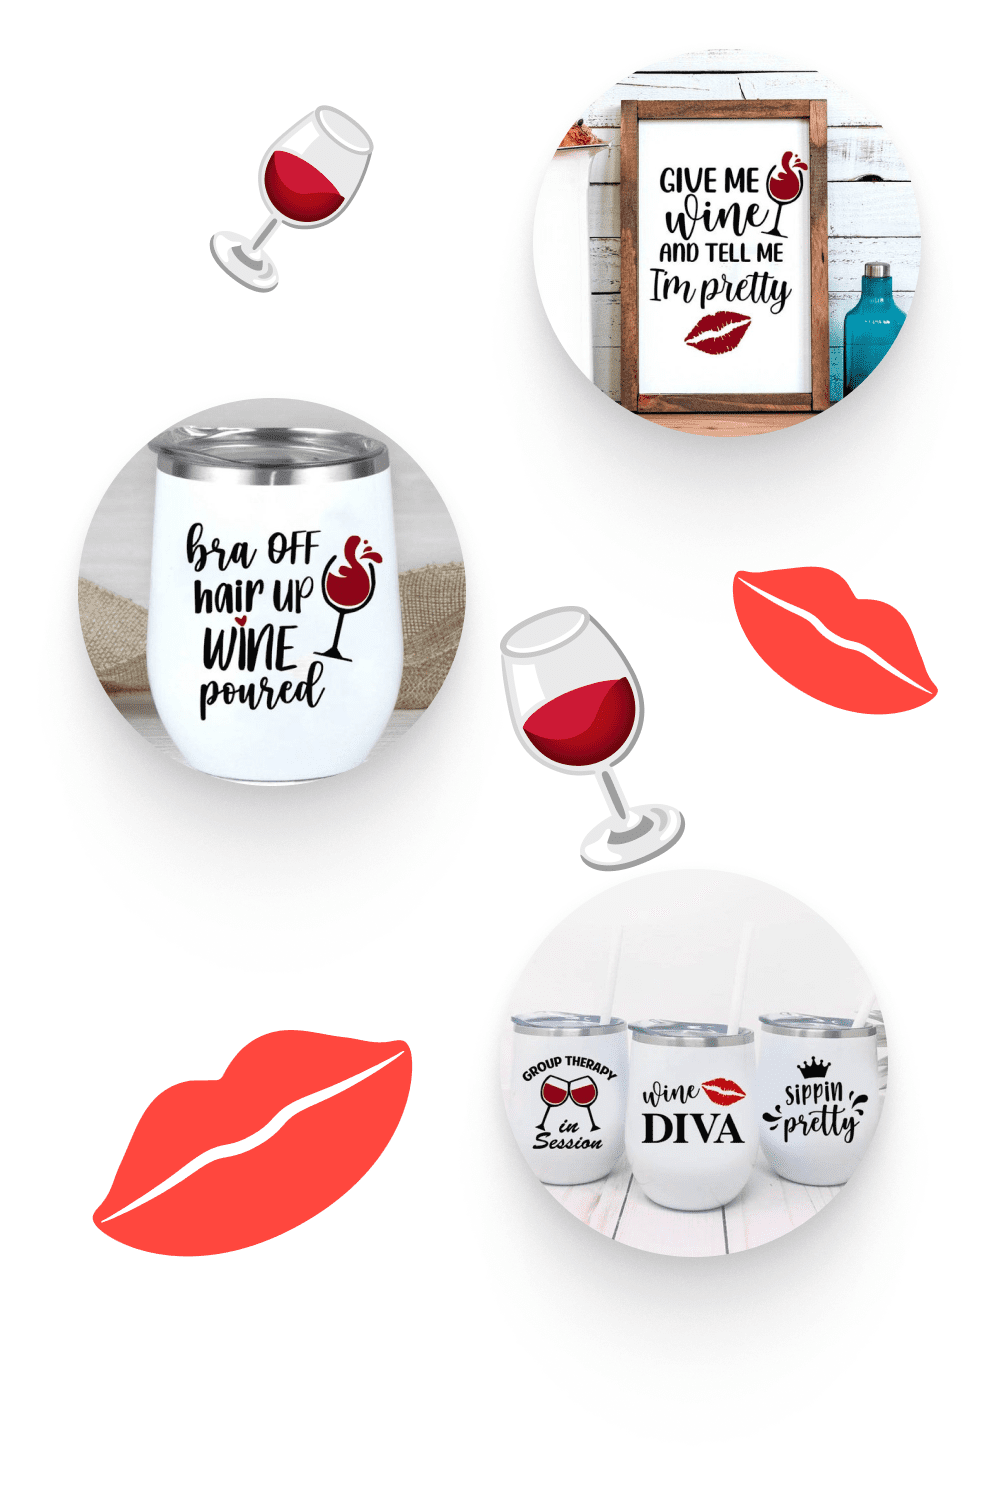 Light template with wine illustrations.